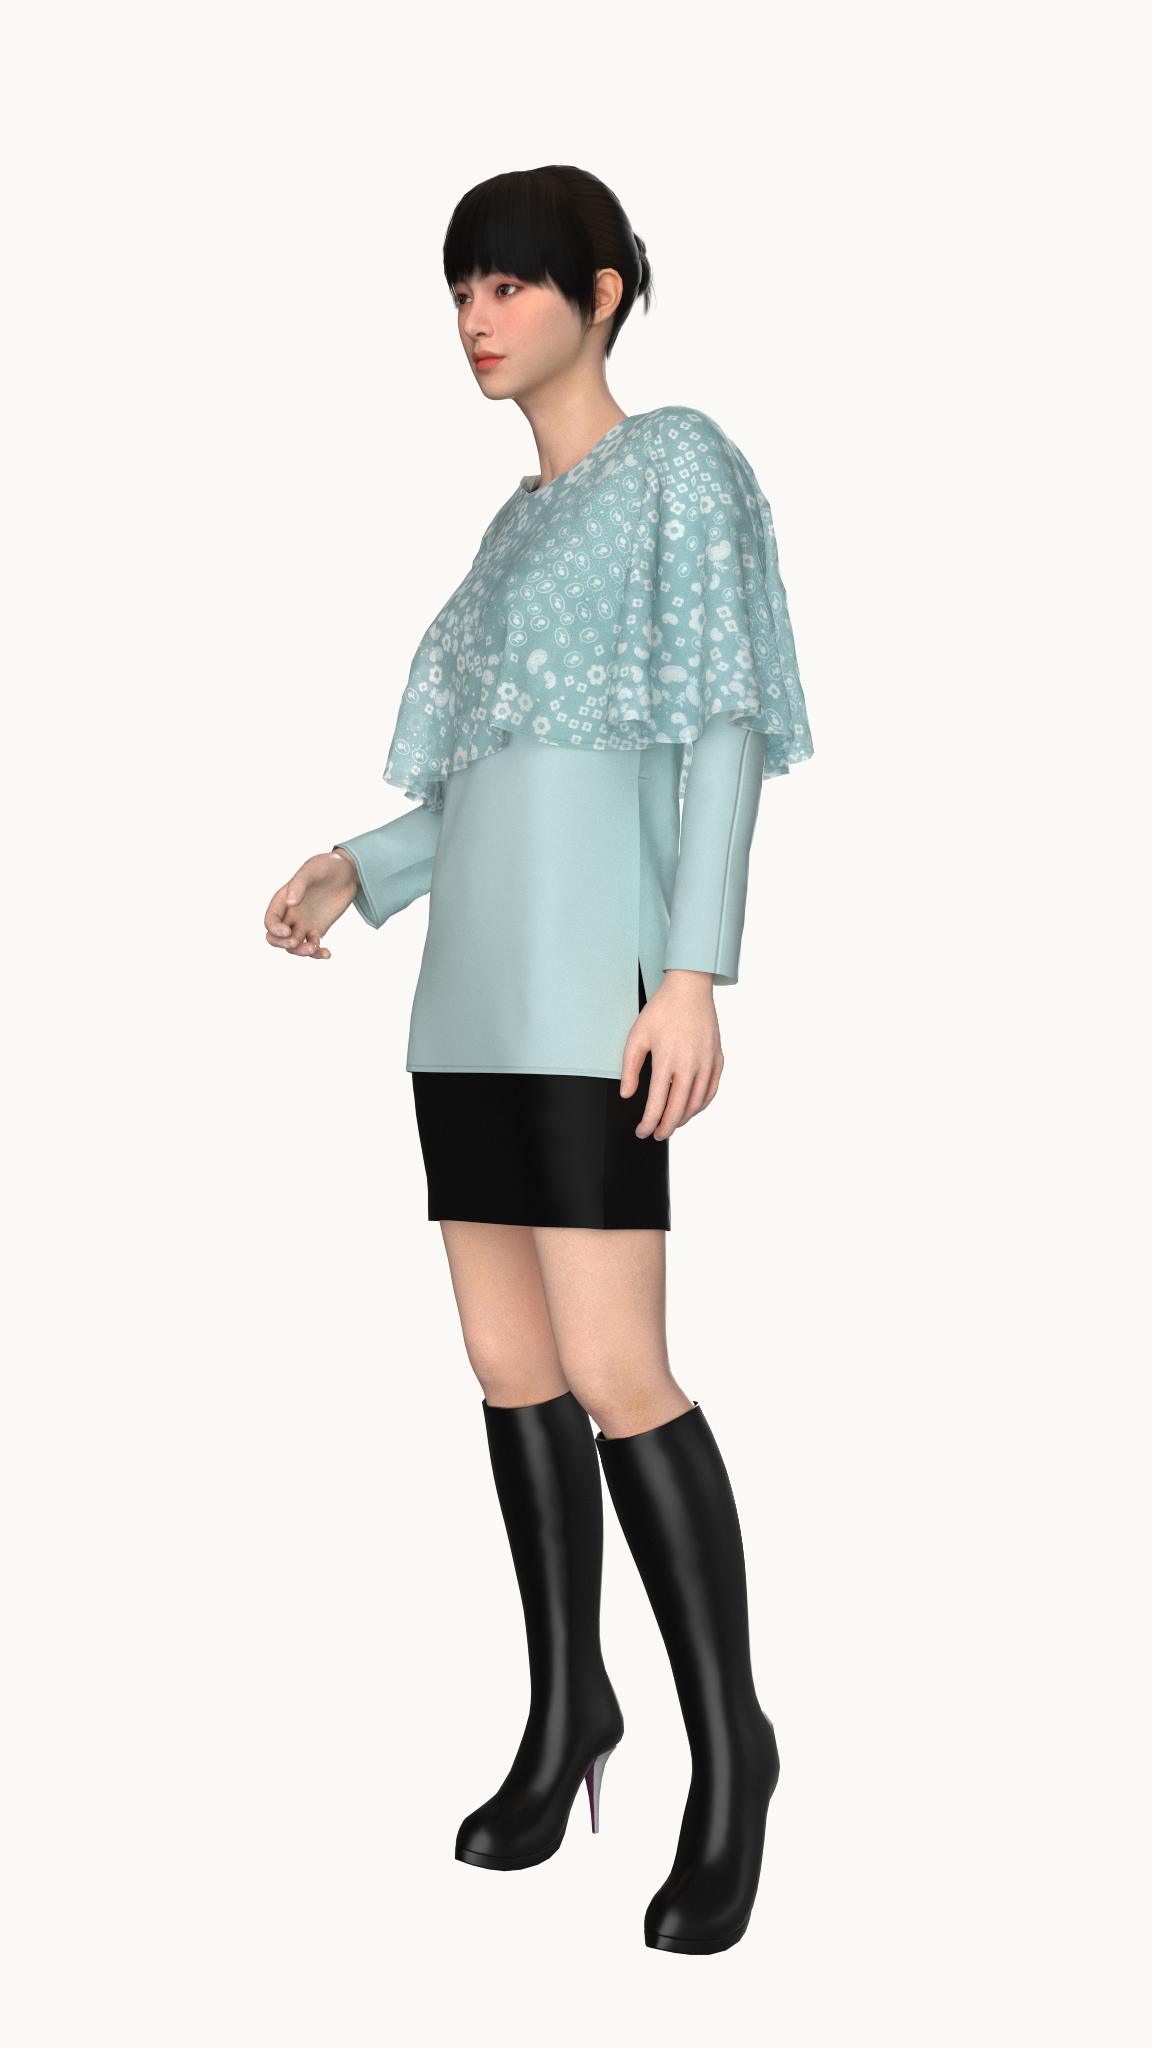 Poncho style layered with full sleeve top